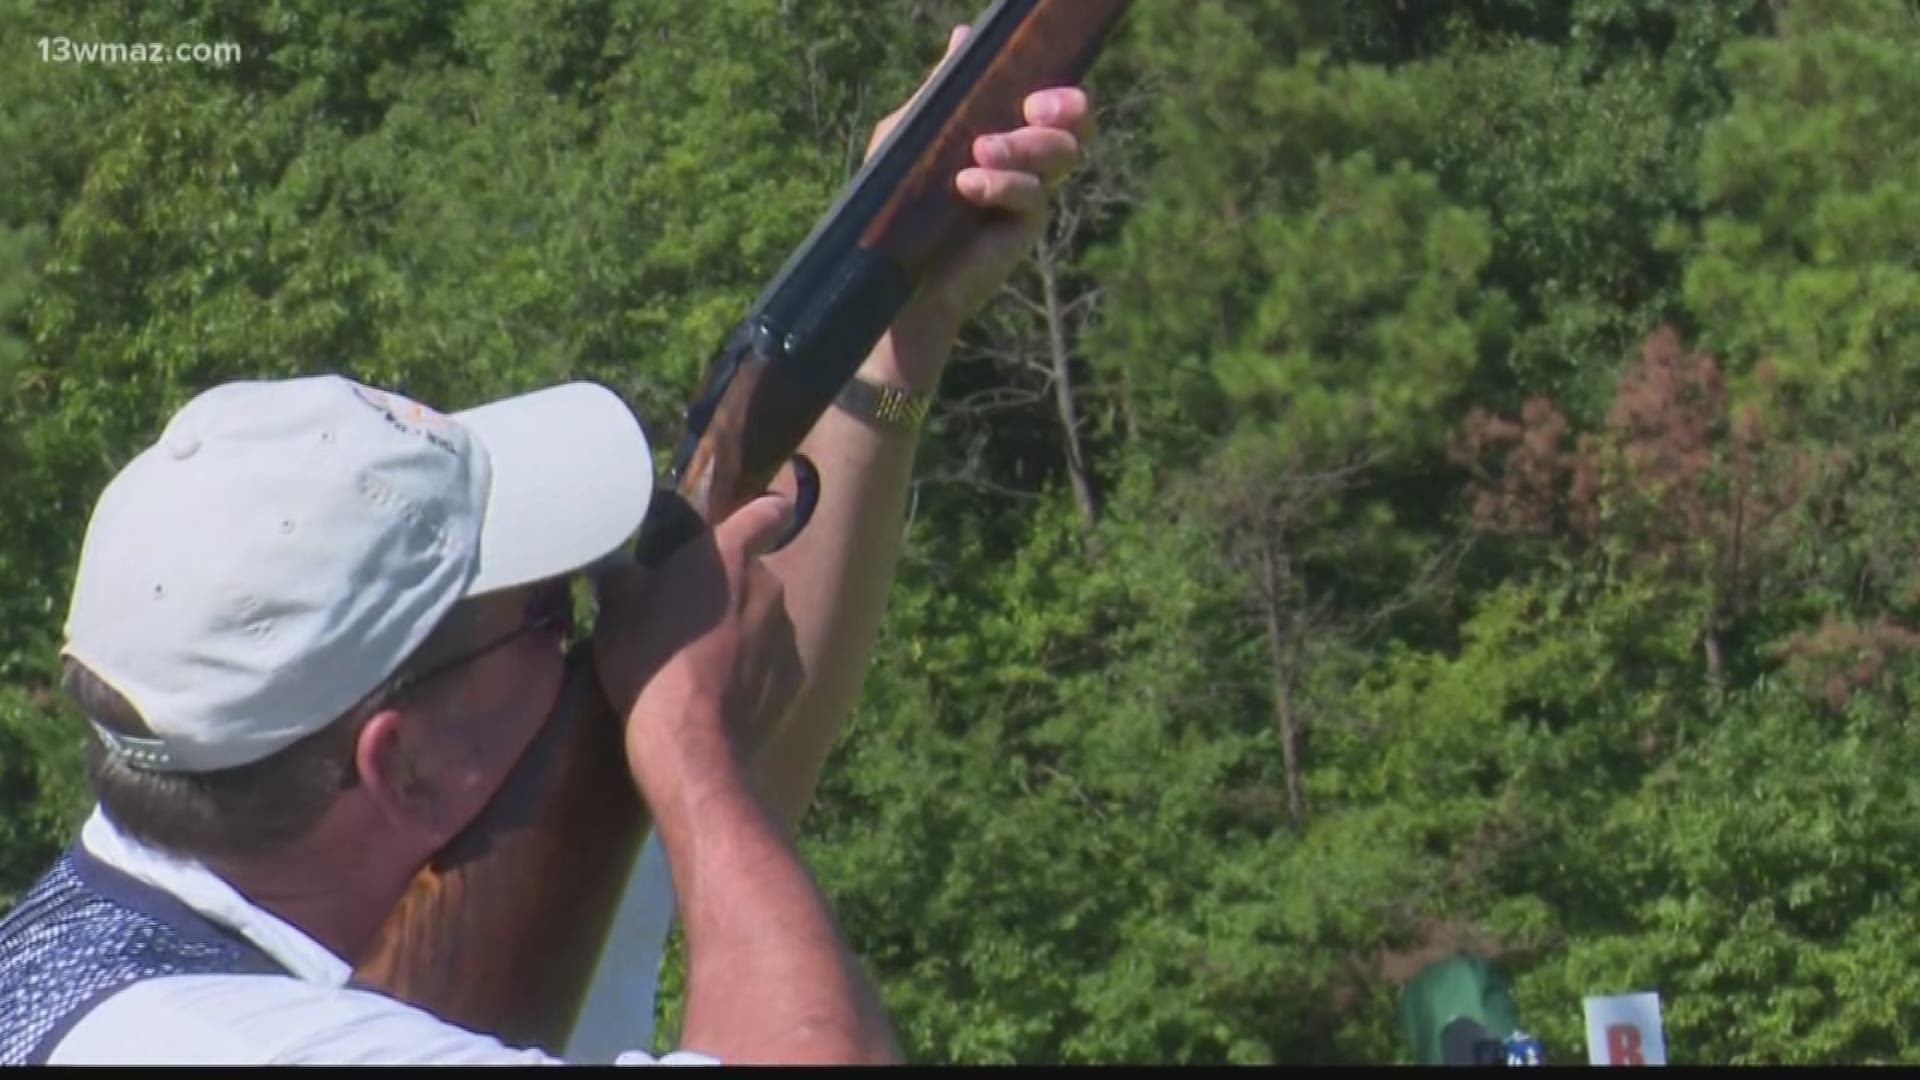 Sport shooters from all over the country are competing this weekend for the 25th annual Turkey Shoot. It was held at the Meadows Gun Club in Forsyth, and money raised went towards wildlife conservation.